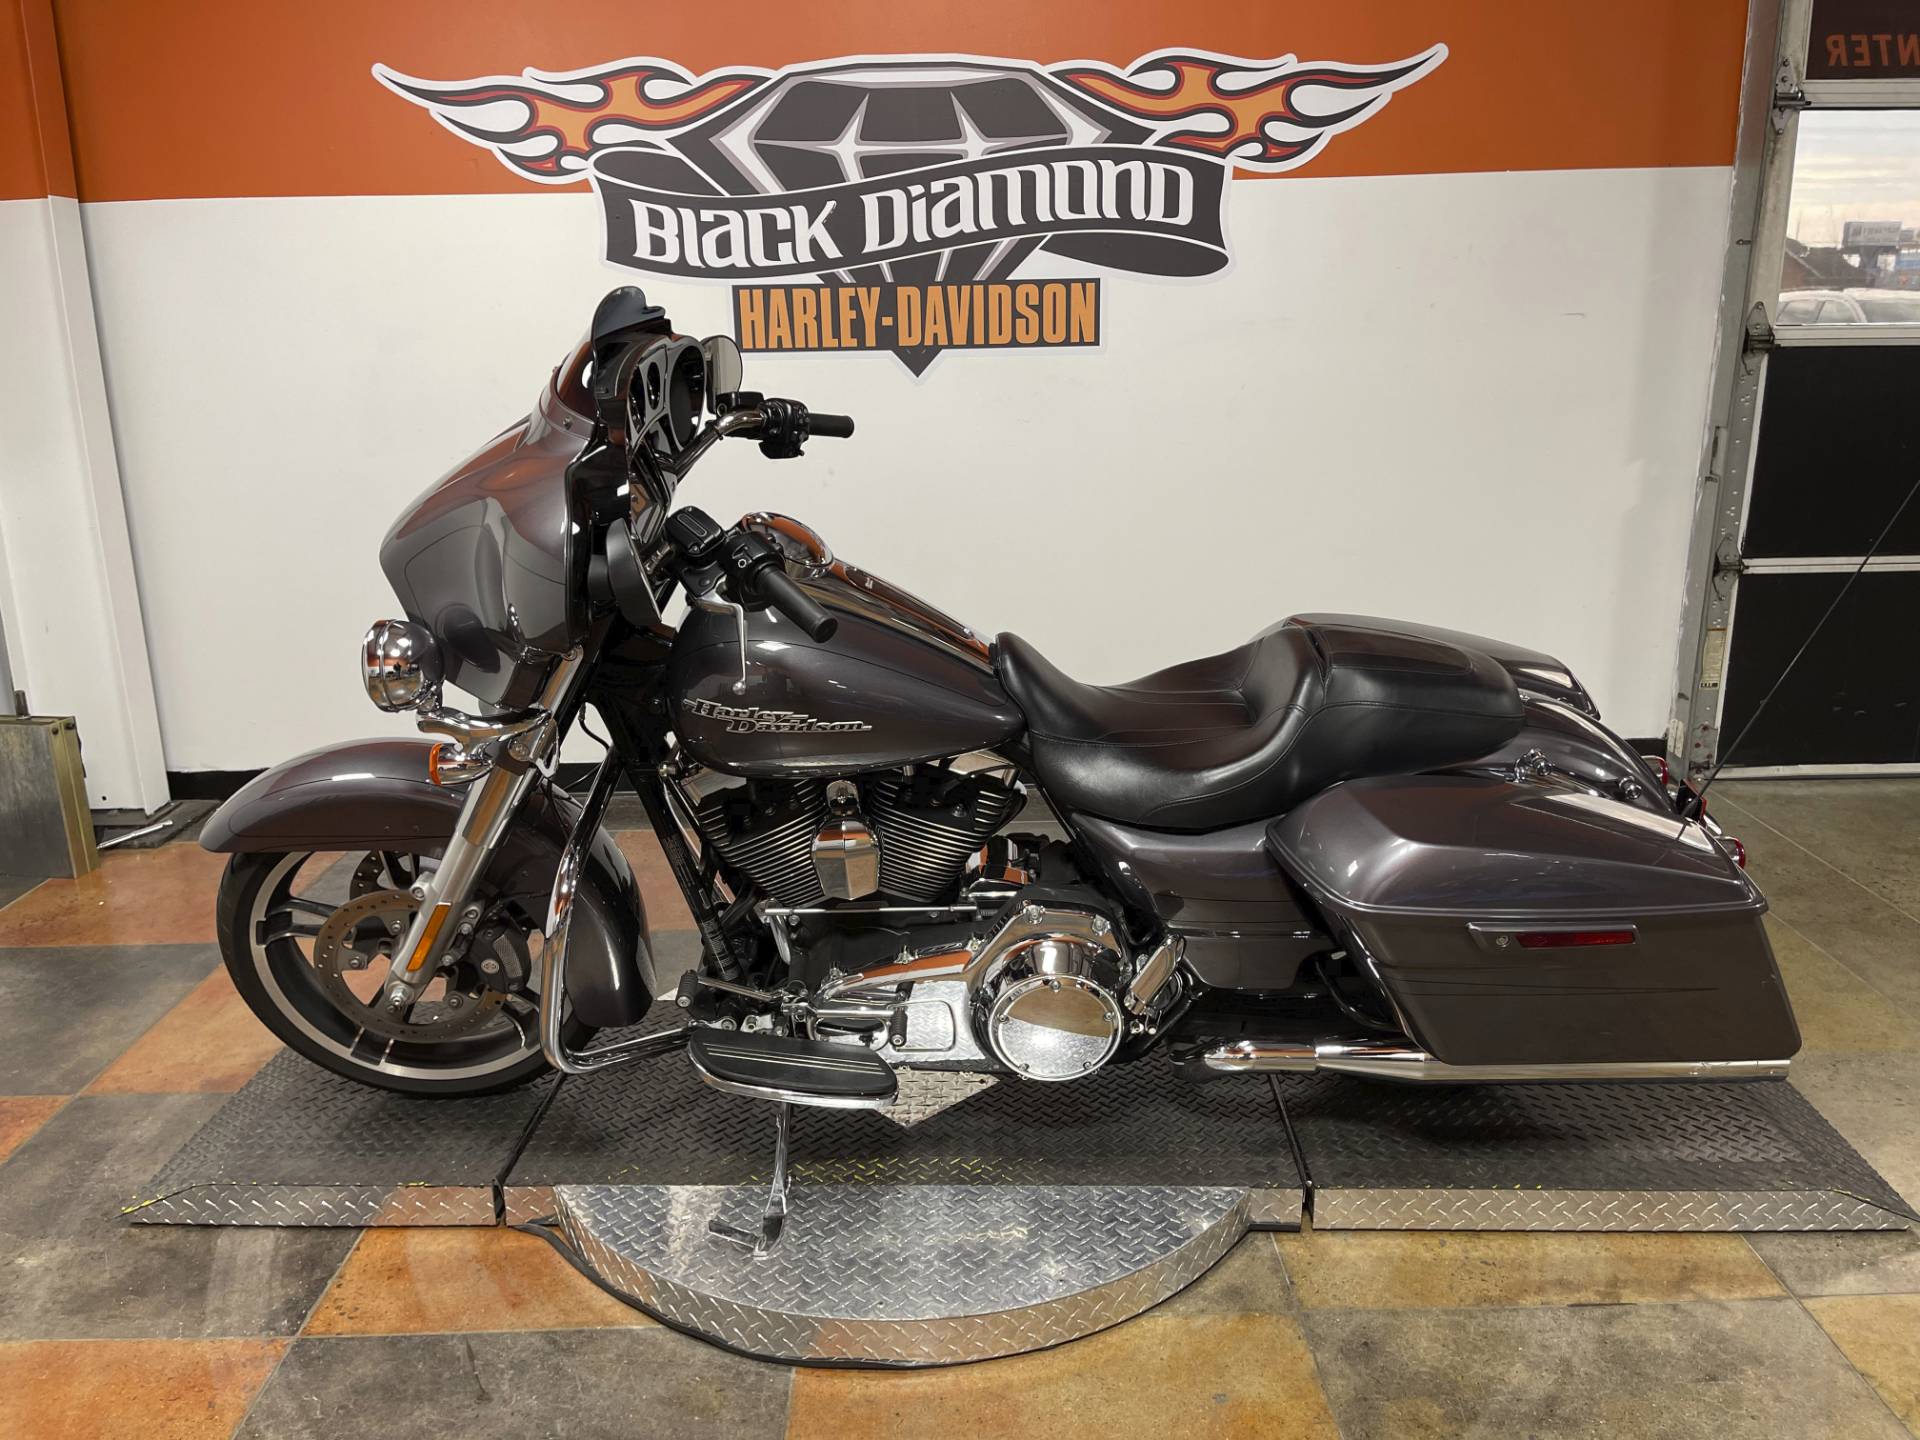 Used 2015 Harley Davidson Street Glide Special Charcoal Pearl Motorcycles In Mount Vernon Il U664775